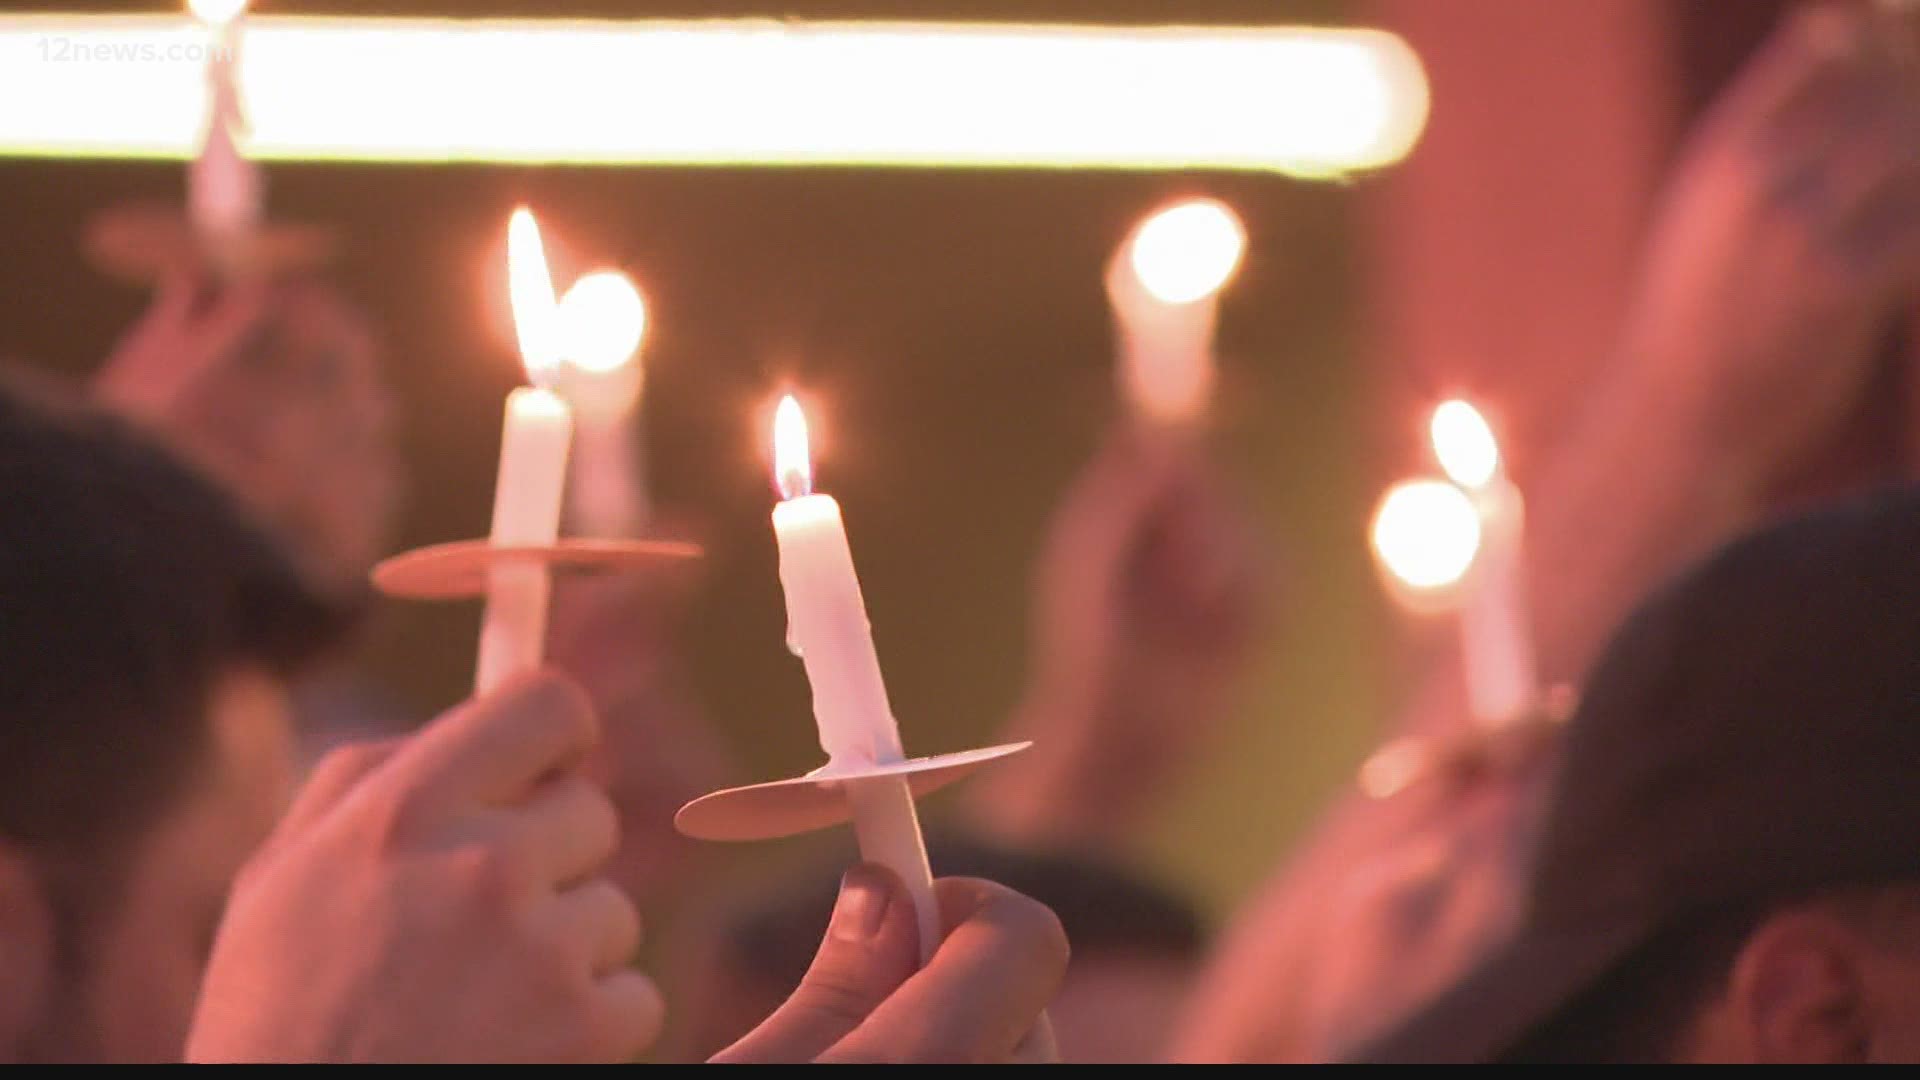 A candlelight vigil was held in the Valley bringing together a group of people that seems unexpected.